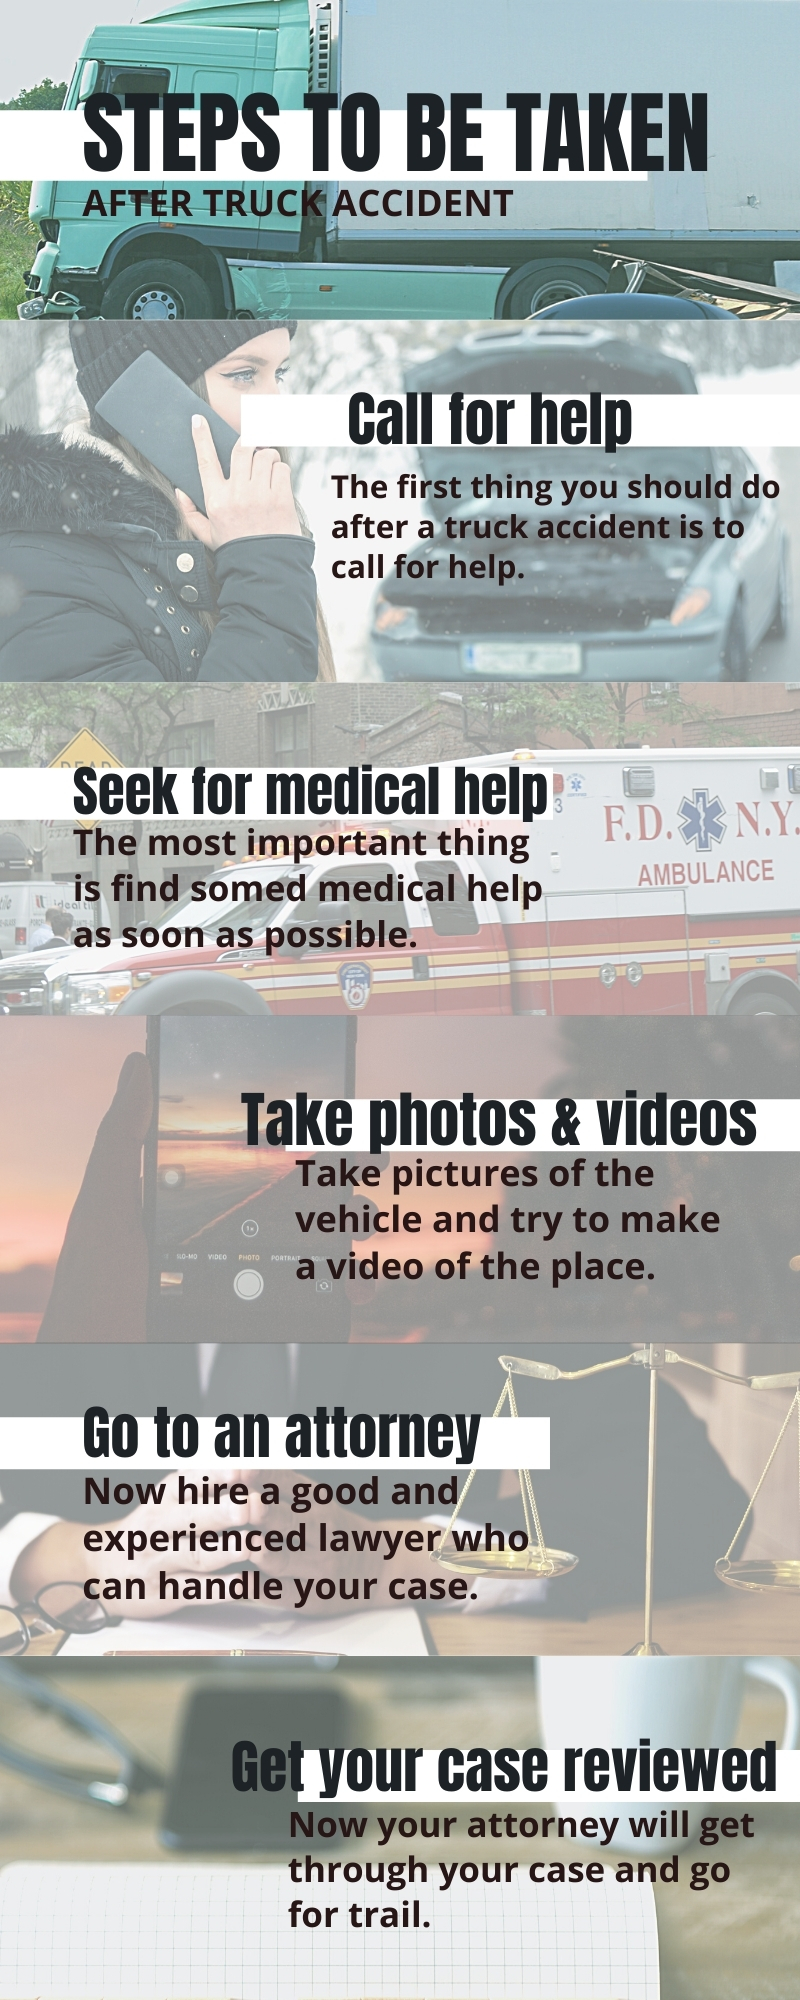 Steps to be taken after truck accident